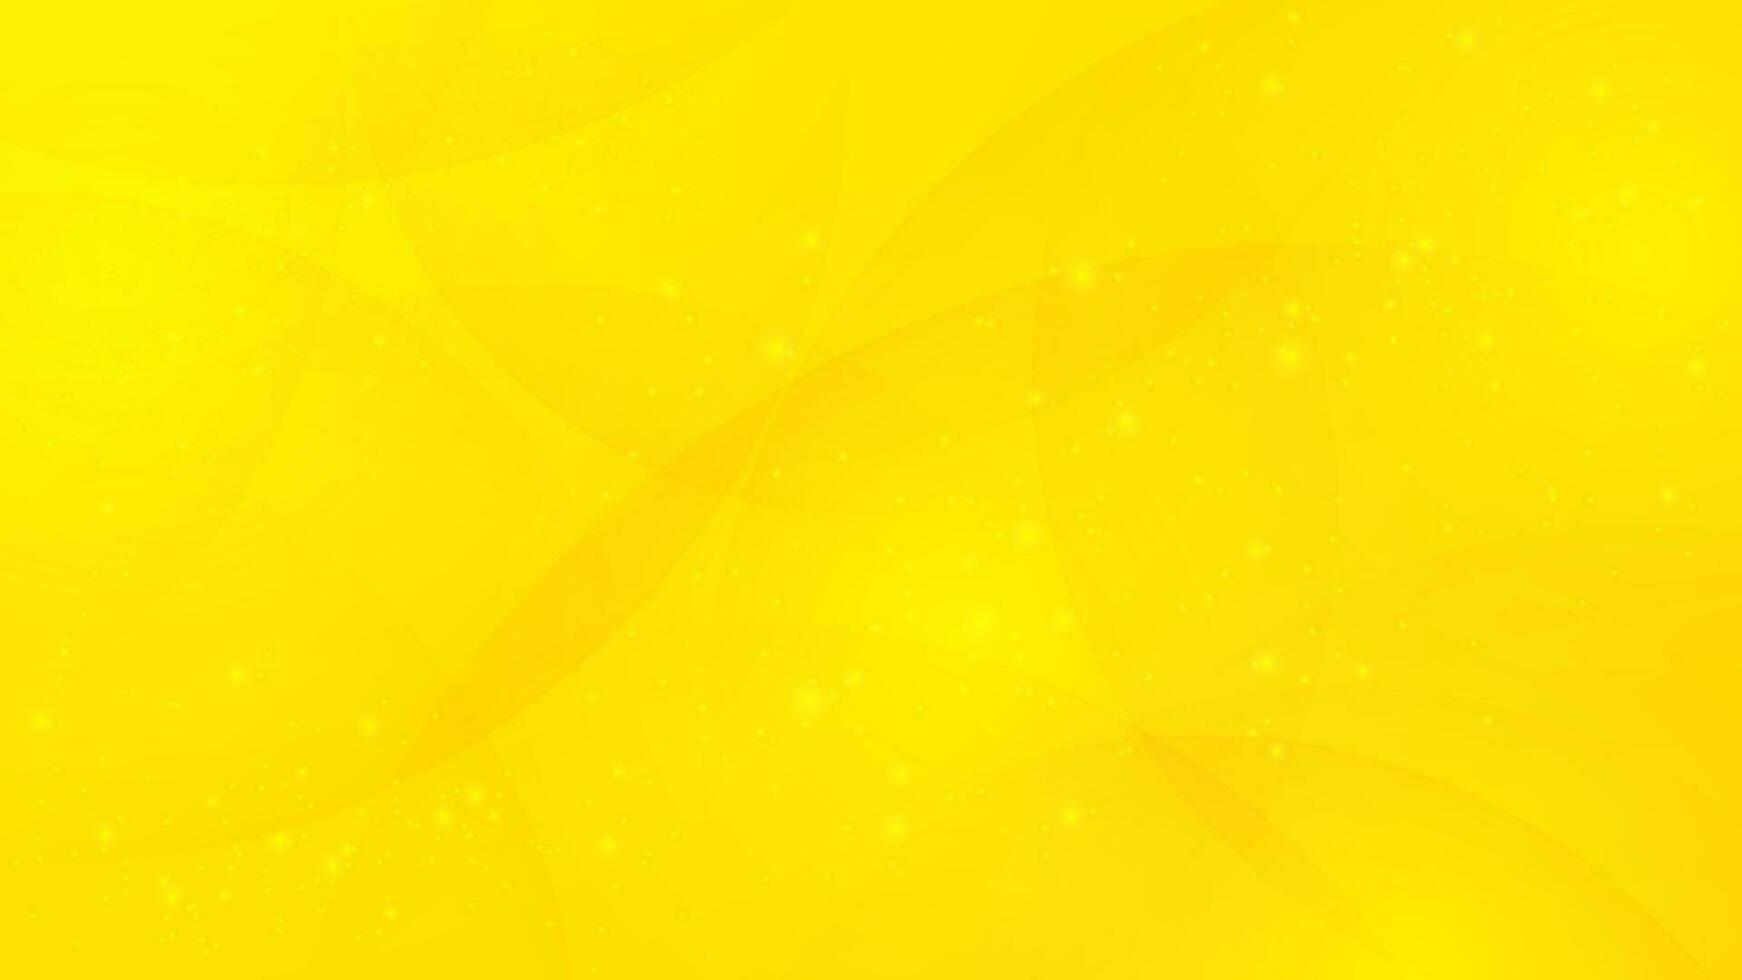 A simple and not too cluttered yellow abstract background suitable for practical applications. vector